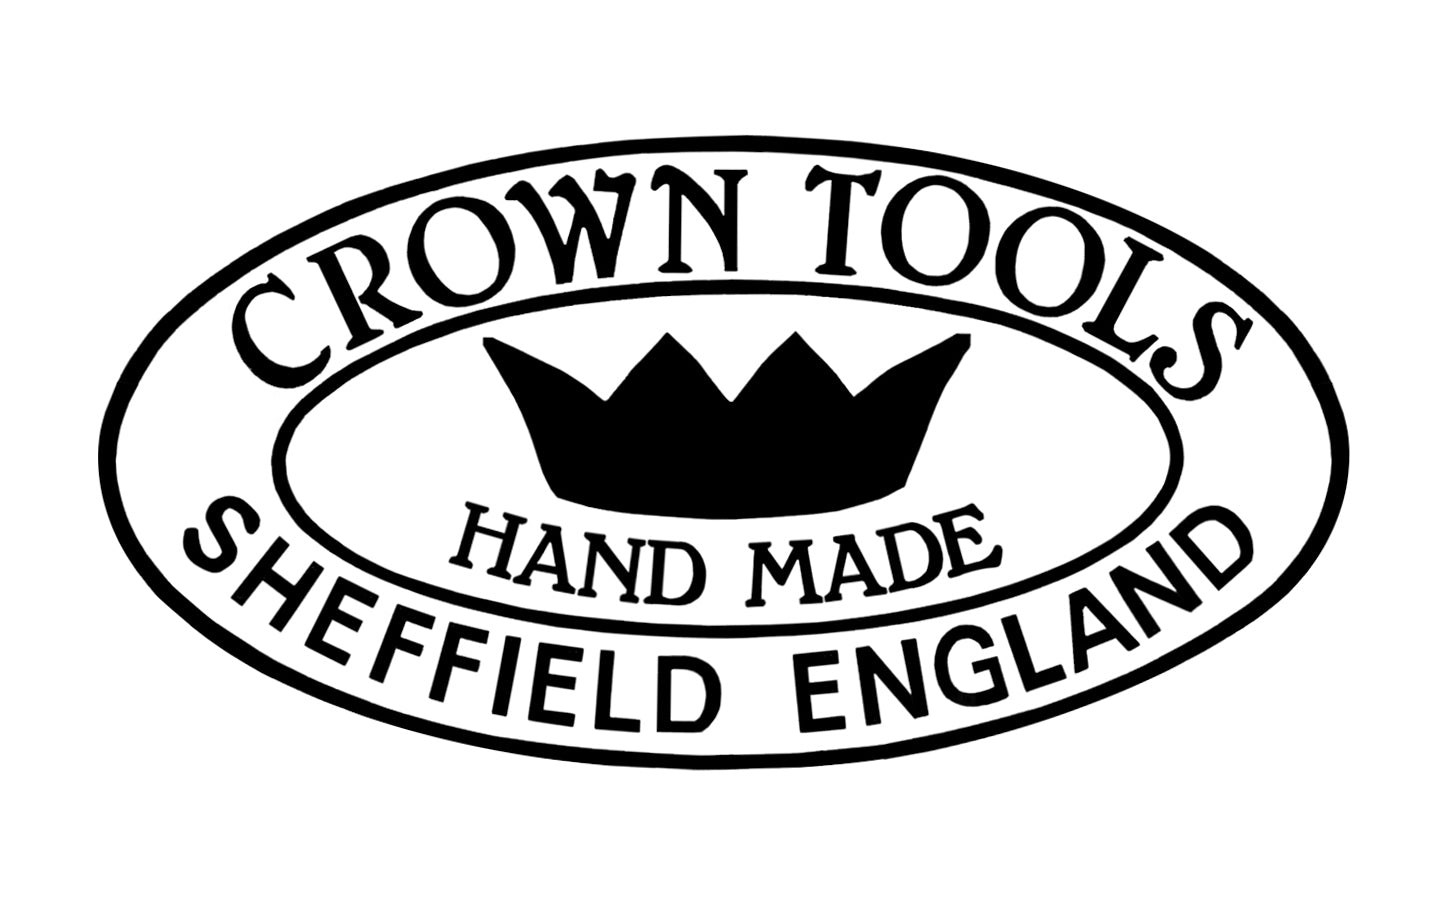 Crown Tools 6" x 3" Cabinet Scraper ~ 0.9 mm thickness. Made in Sheffield, England. The rectangle shaped scraper creates razor-thin shavings & produces a fine smooth finish when used. Moderate stiffness. Made of quality high hardened & tempered high carbon steel. Rectangle Cabinet scraper. Crown Model 375AW.